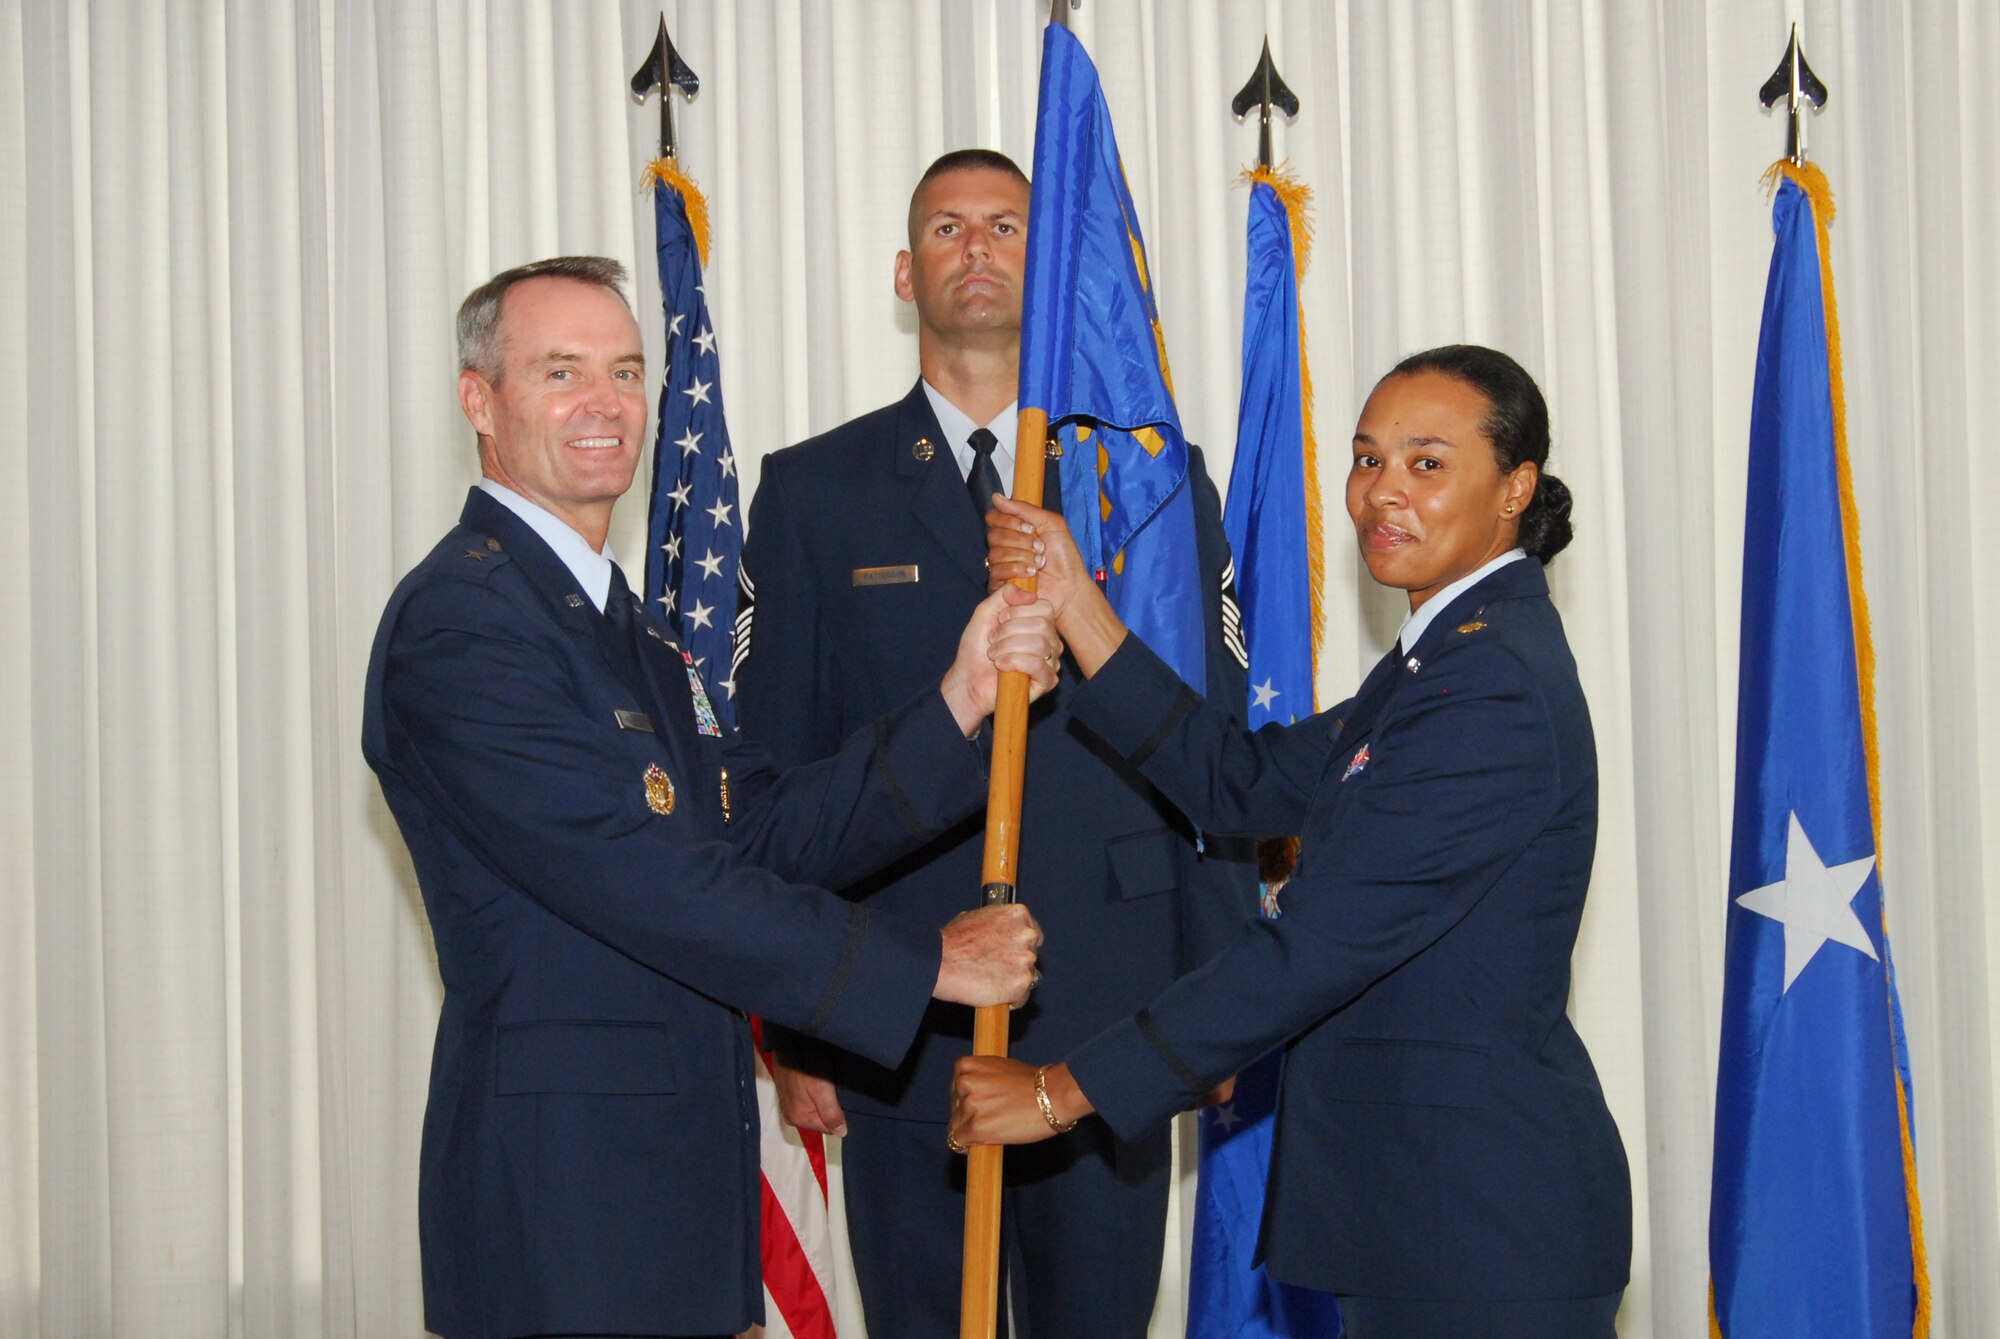 (Left) Brig. Gen. Darryl Roberson, 325th Fighter Wing commander, presents the guidon to Maj. Ericka Farmer, as she takes command of the 325th Comptroller Squadron. The change of command ceremony took place July 10 at the Heritage Club. (U.S. Air Force photo/Susan Trahan)